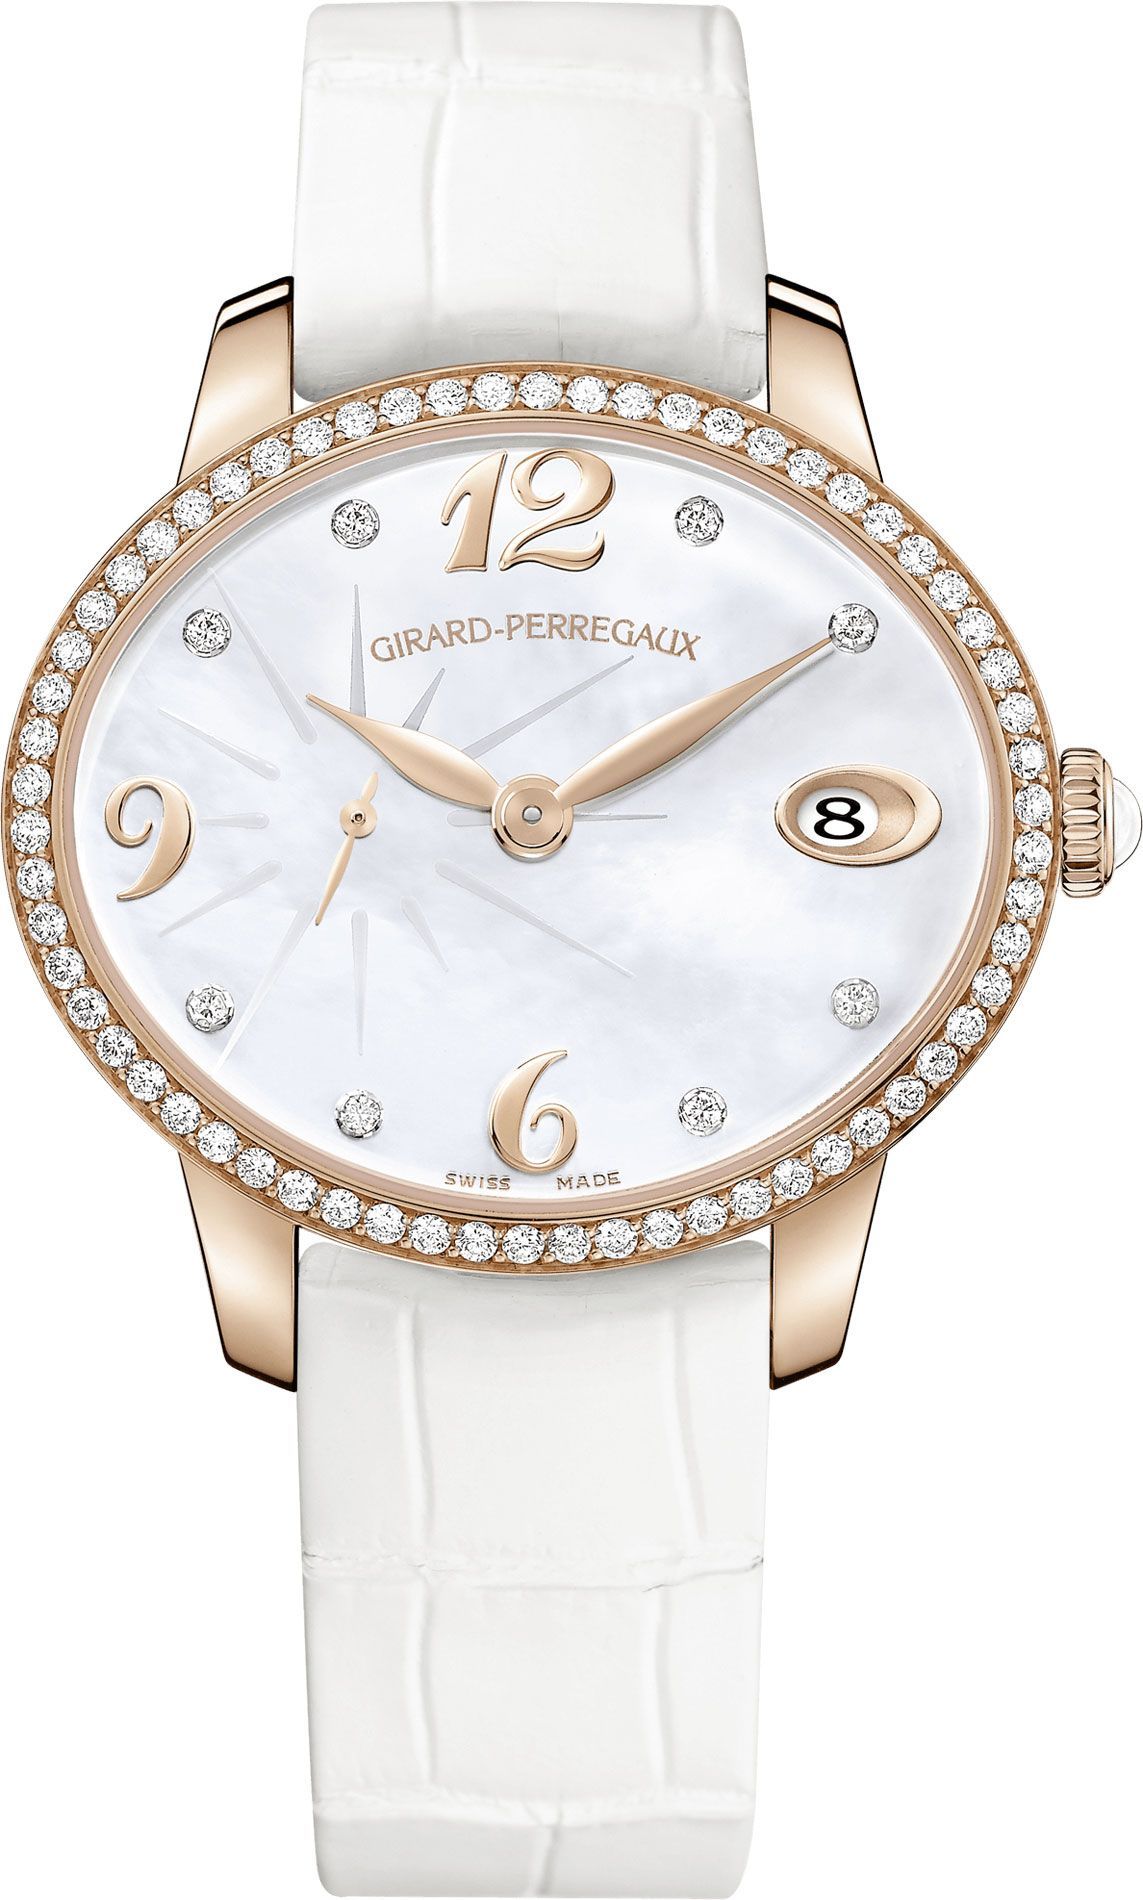 Girard-Perregaux Small Seconds 30.40 mm Watch in Silver Dial For Women - 1